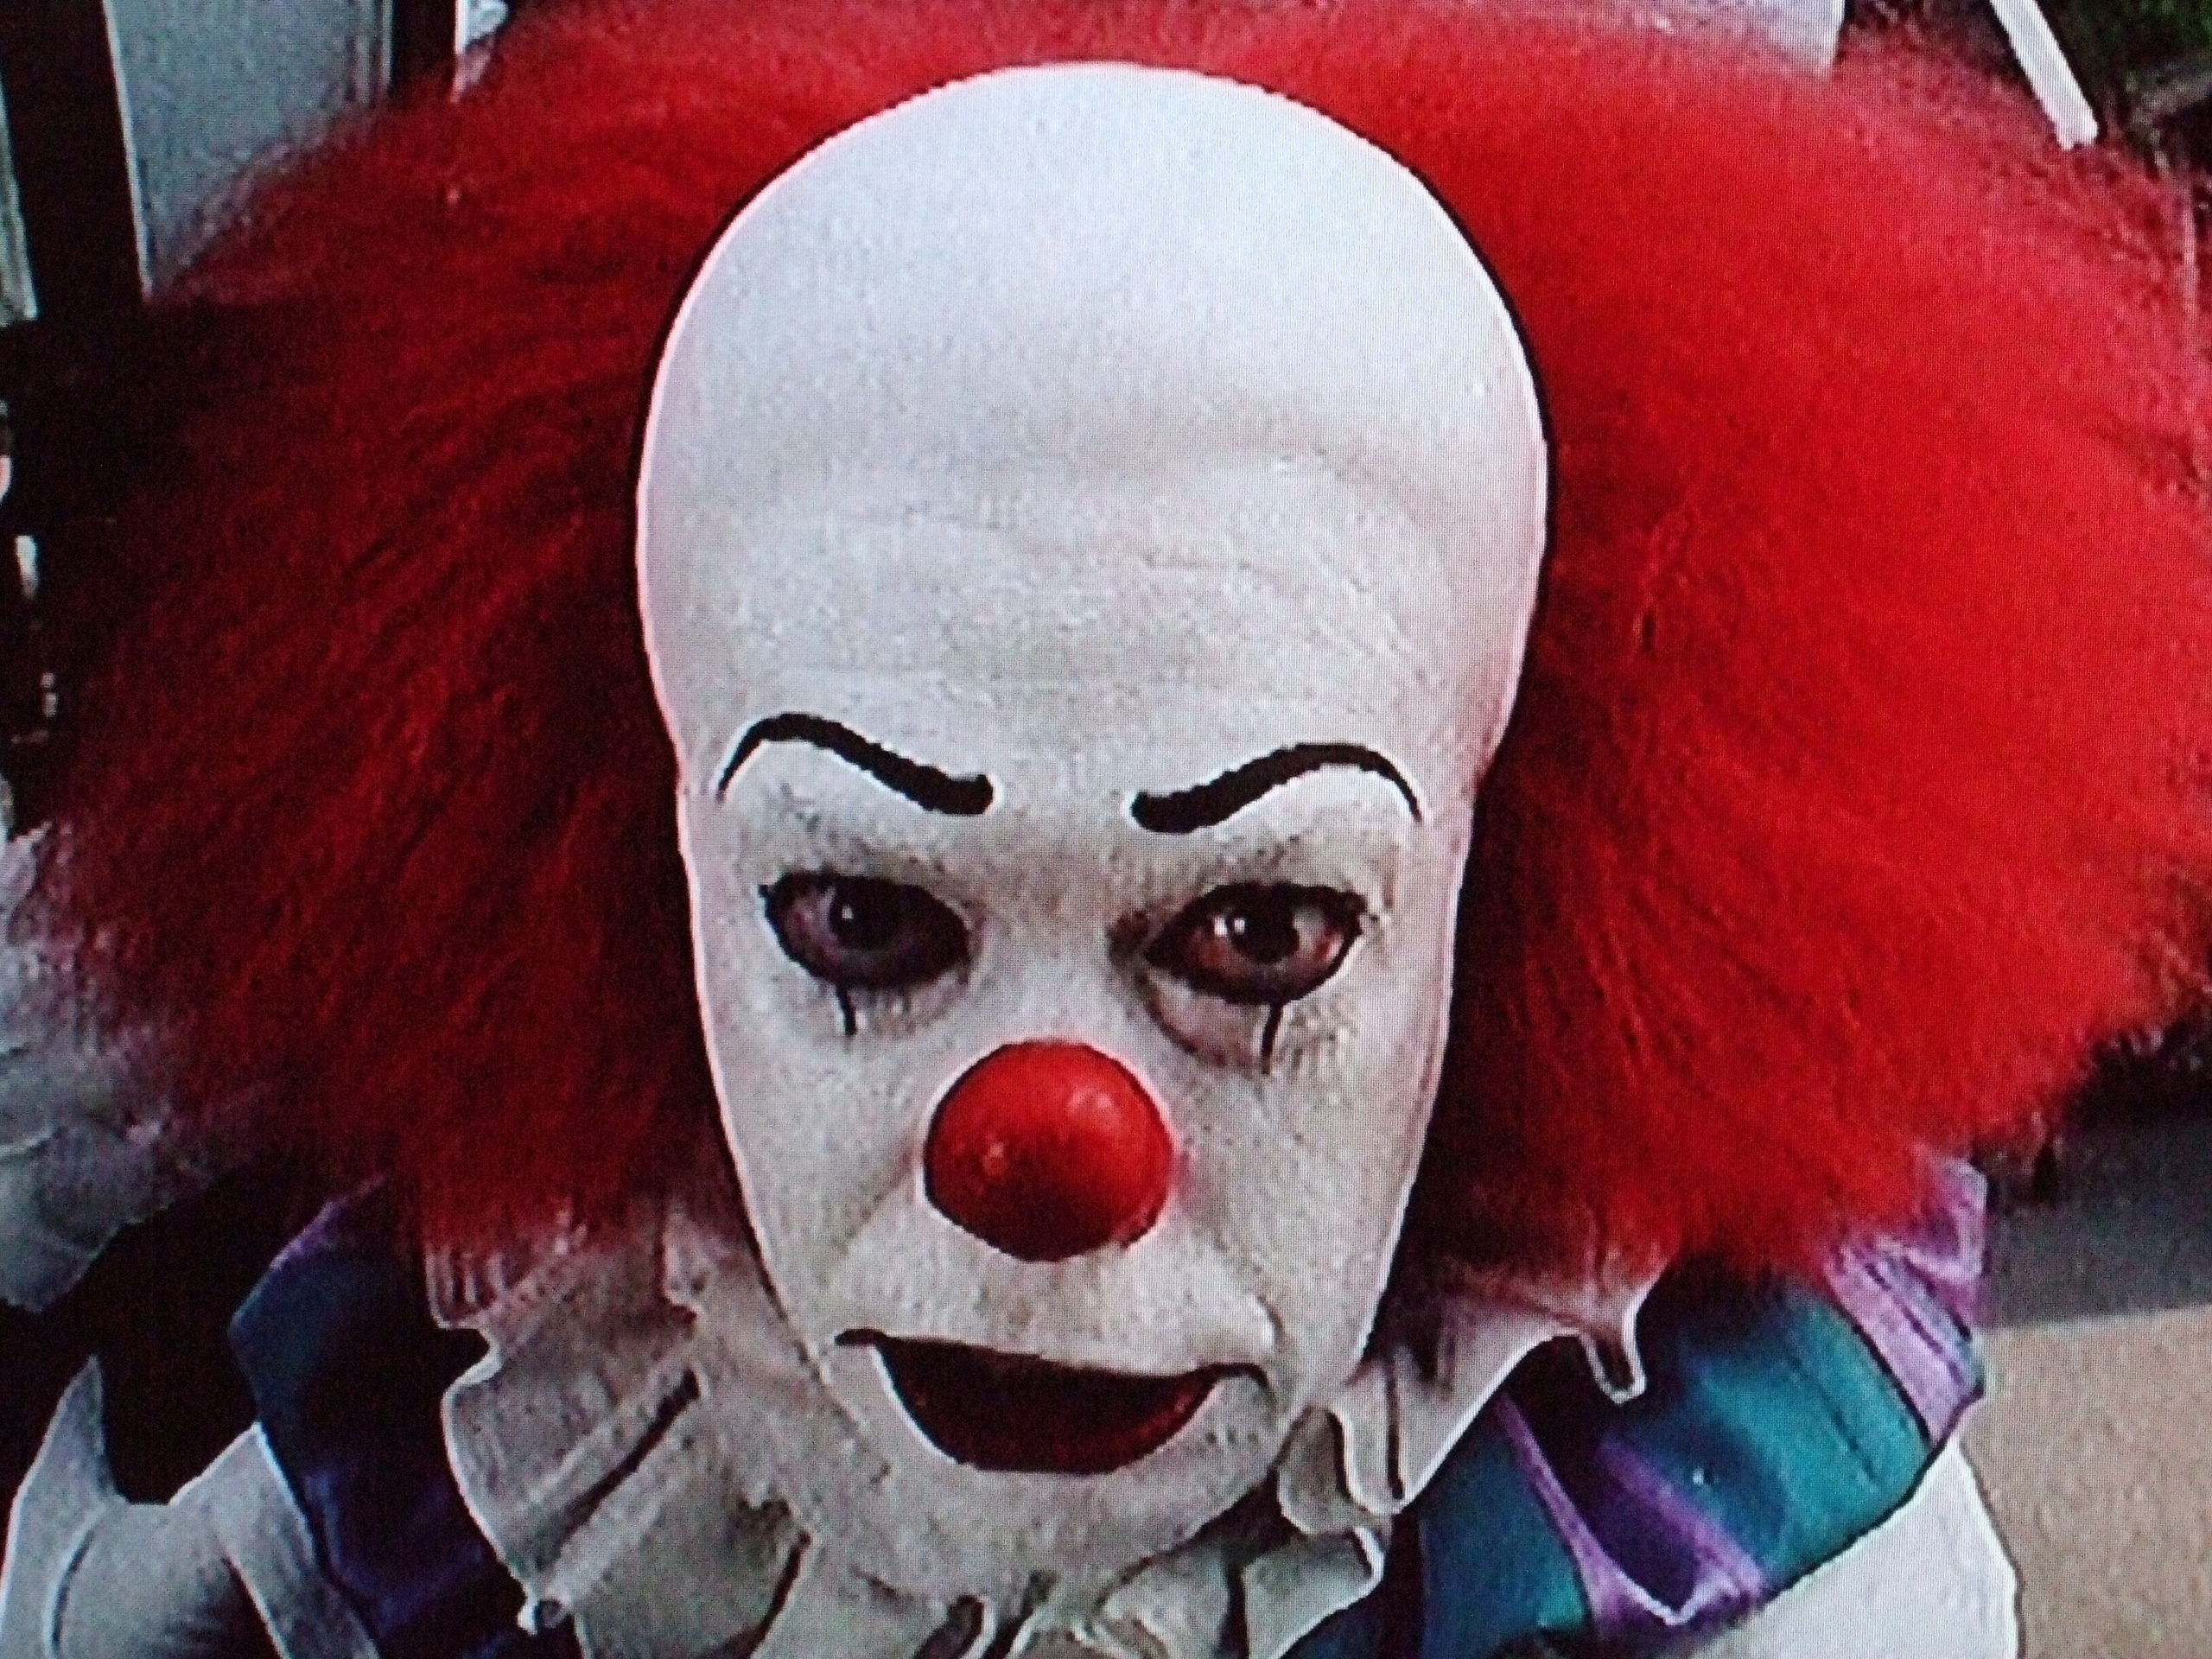 Pennywise-pennywise-20908060-2560-1920.jpg